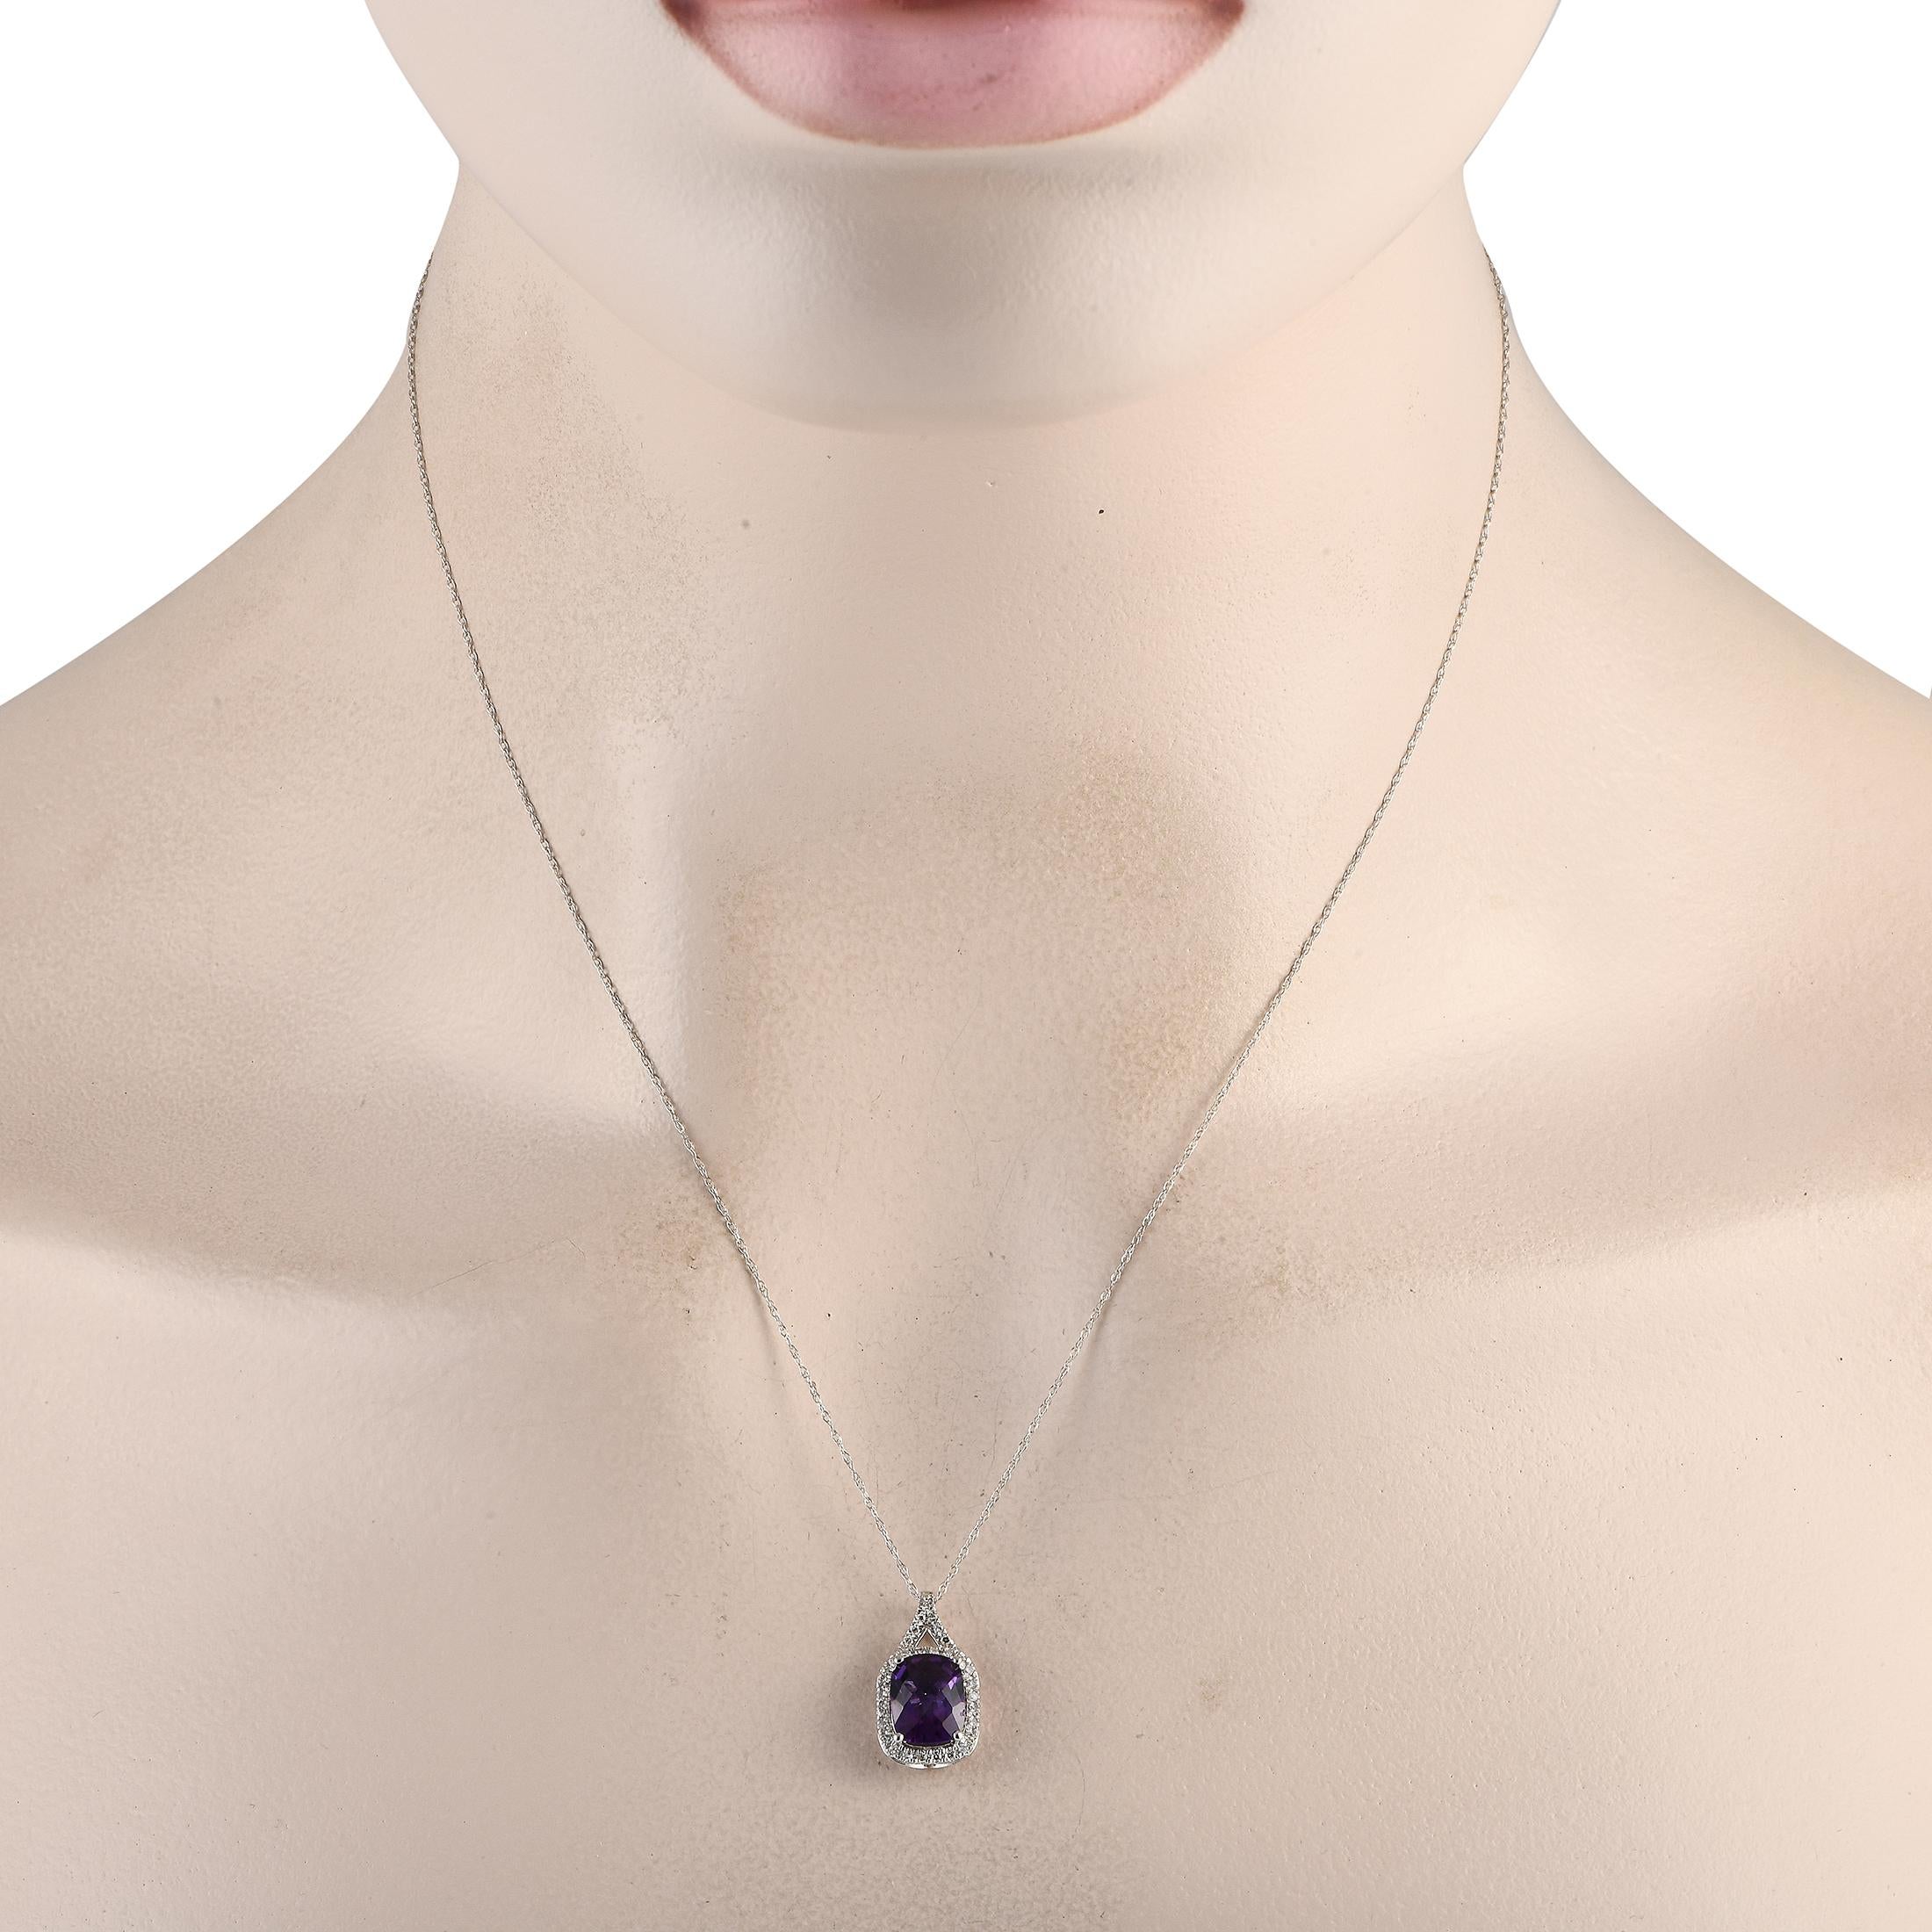 This 14K White Gold necklace is simple, elegant, and understated. Along with a breathtaking Amethyst gemstone, it comes complete with sparkling Diamond accents totaling 0.13 carats. This pieces pendant measures 0.75 long by 0.45 wide and is